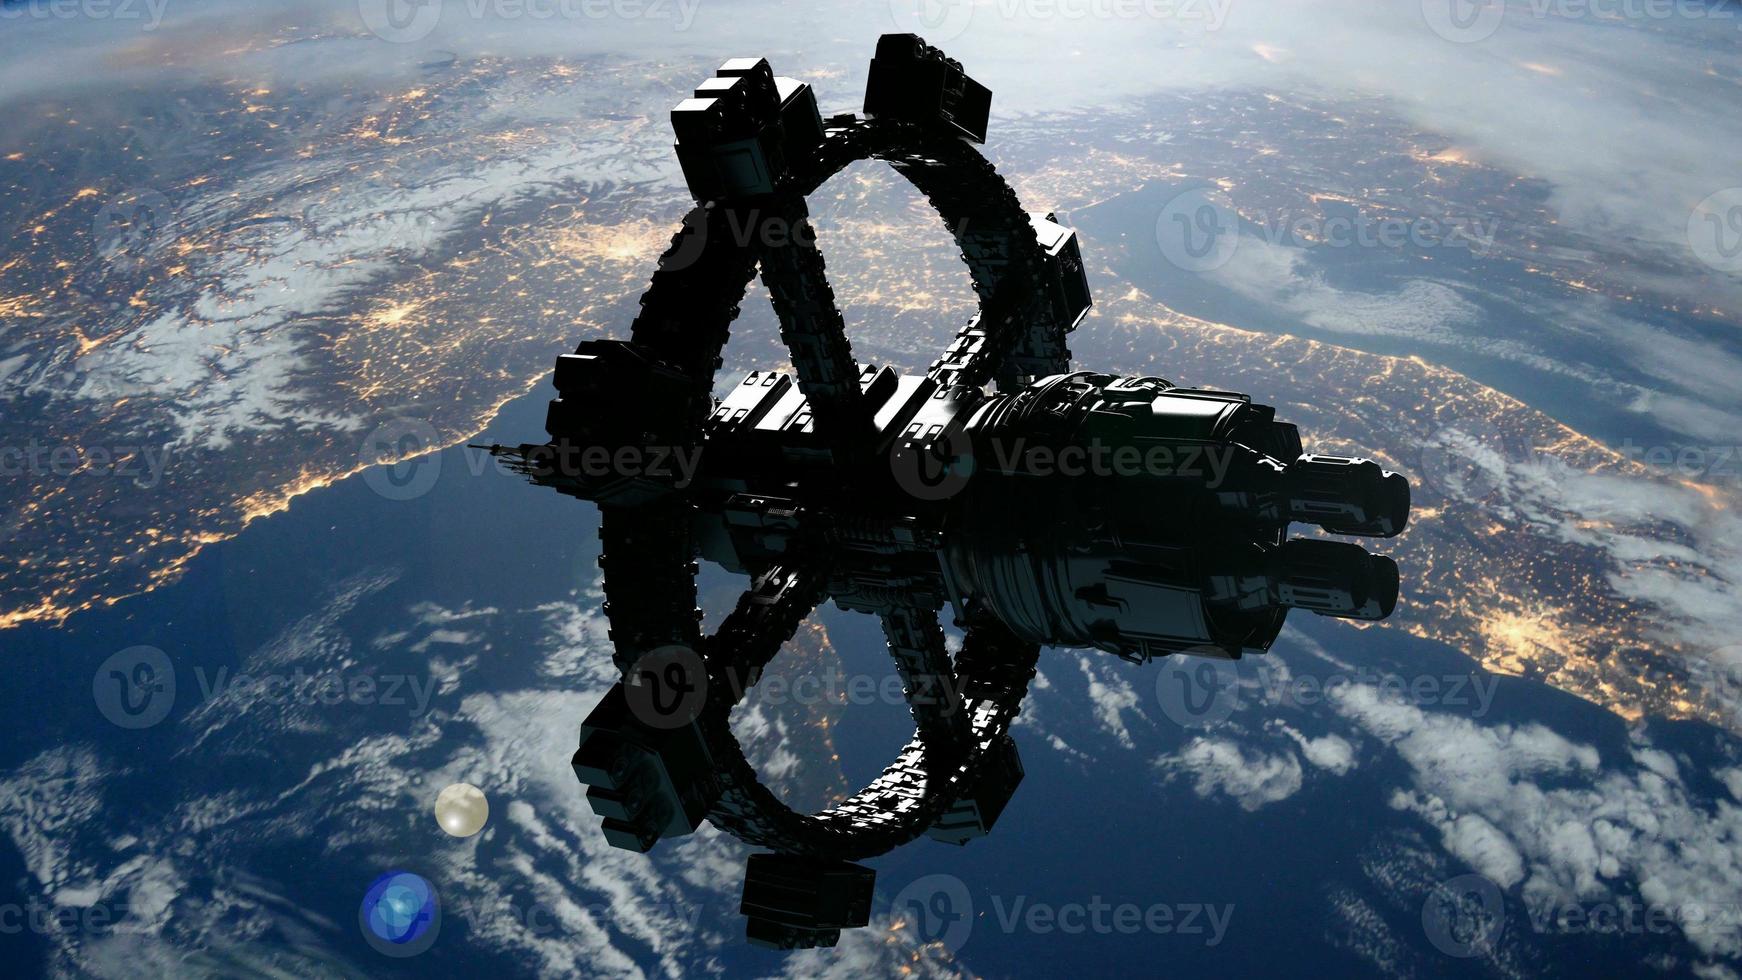 Space Station Orbiting Earth. Elements of this image furnished by NASA photo